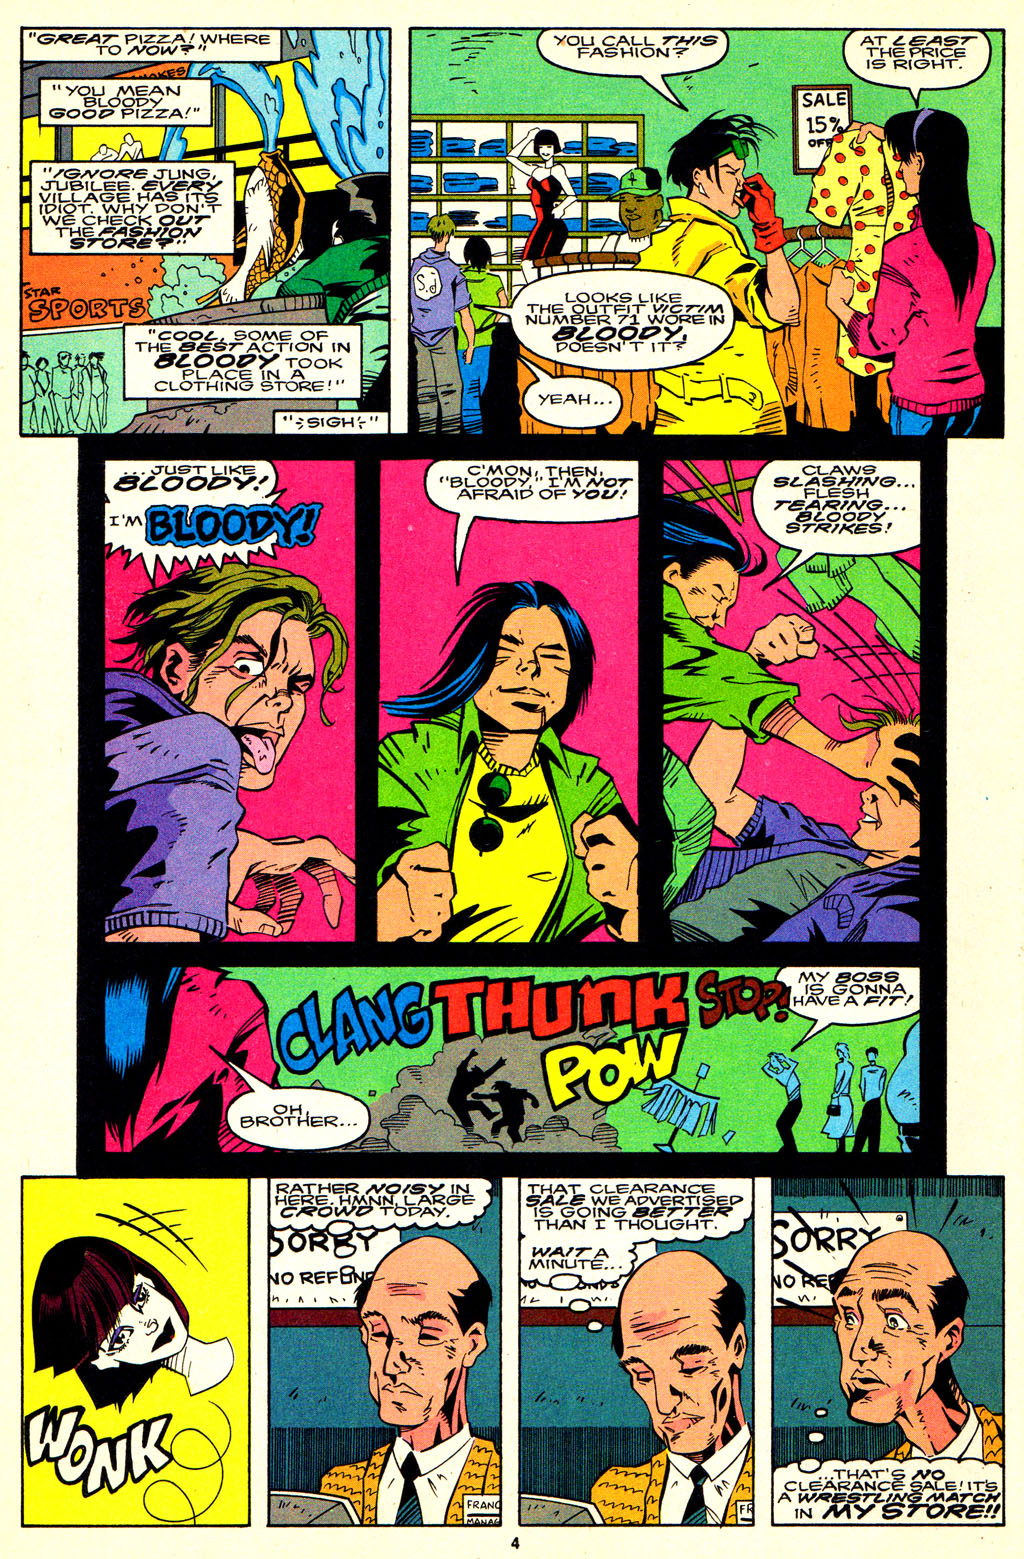 Read online Spider-Man "How to Beat the Bully" / Jubilee "Peer Pressure" comic -  Issue # Full - 6